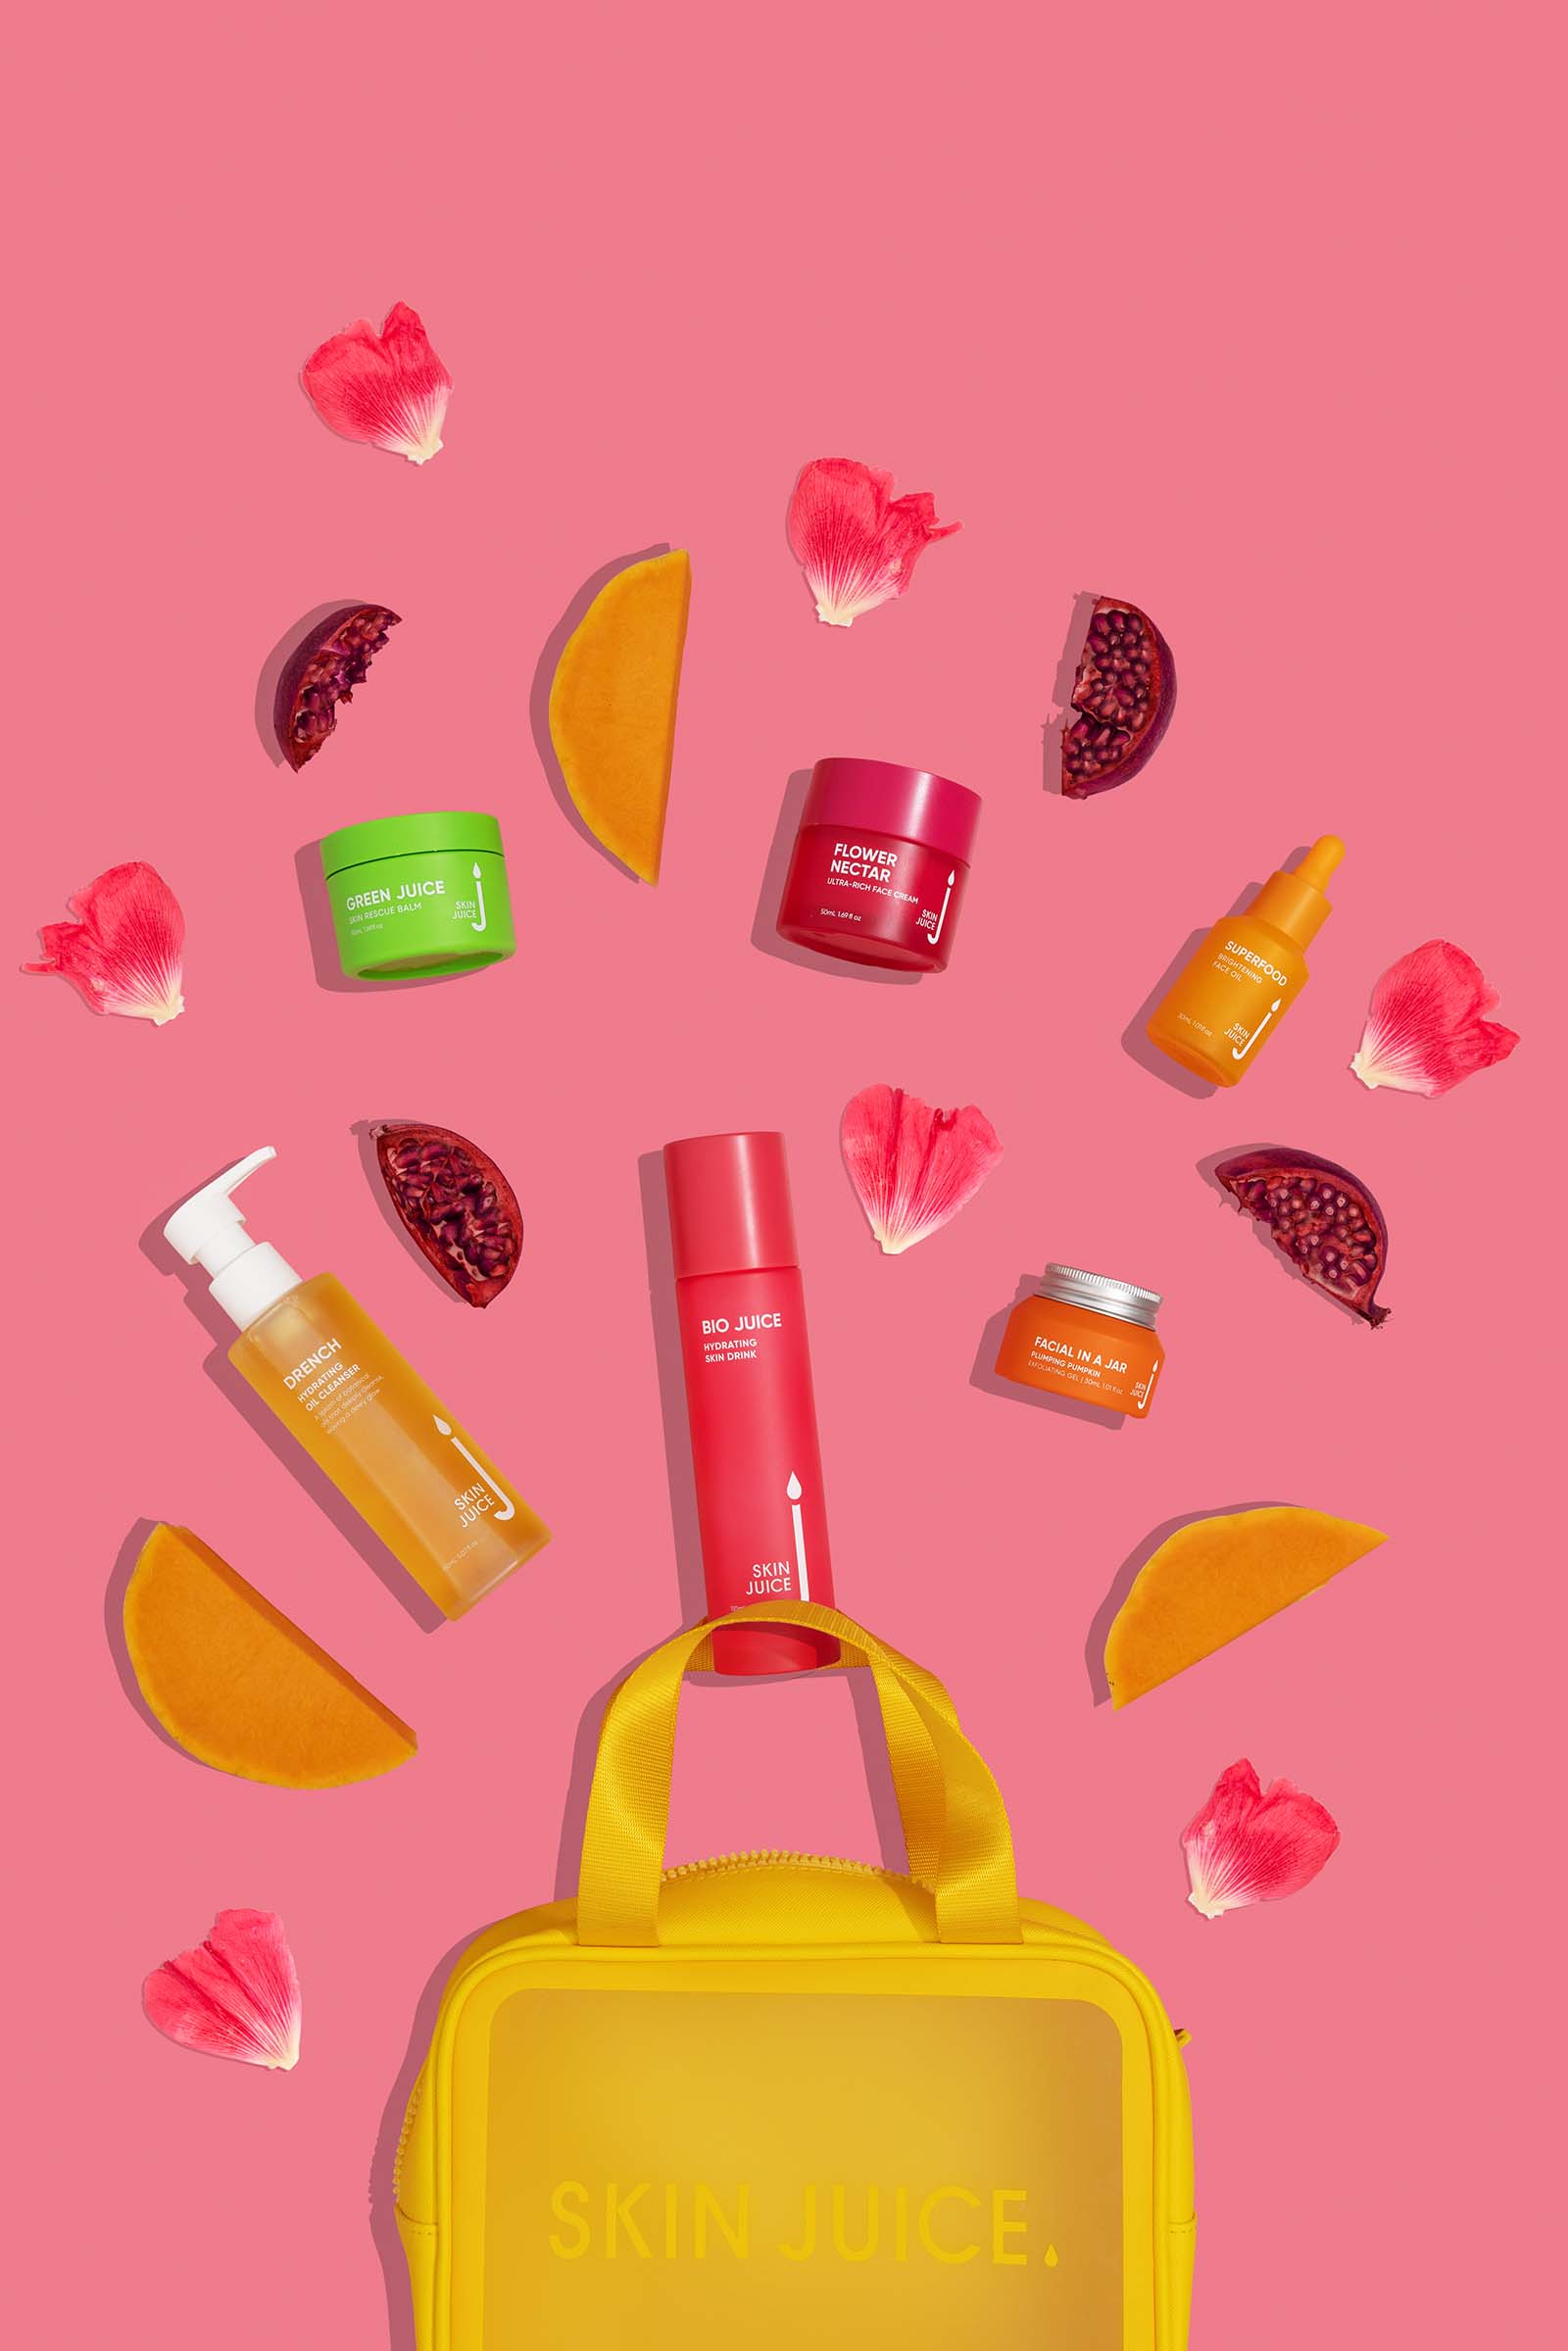 Colourful Skincare Product Photography for a Vibrant Skincare Brand By Colourpop Studio